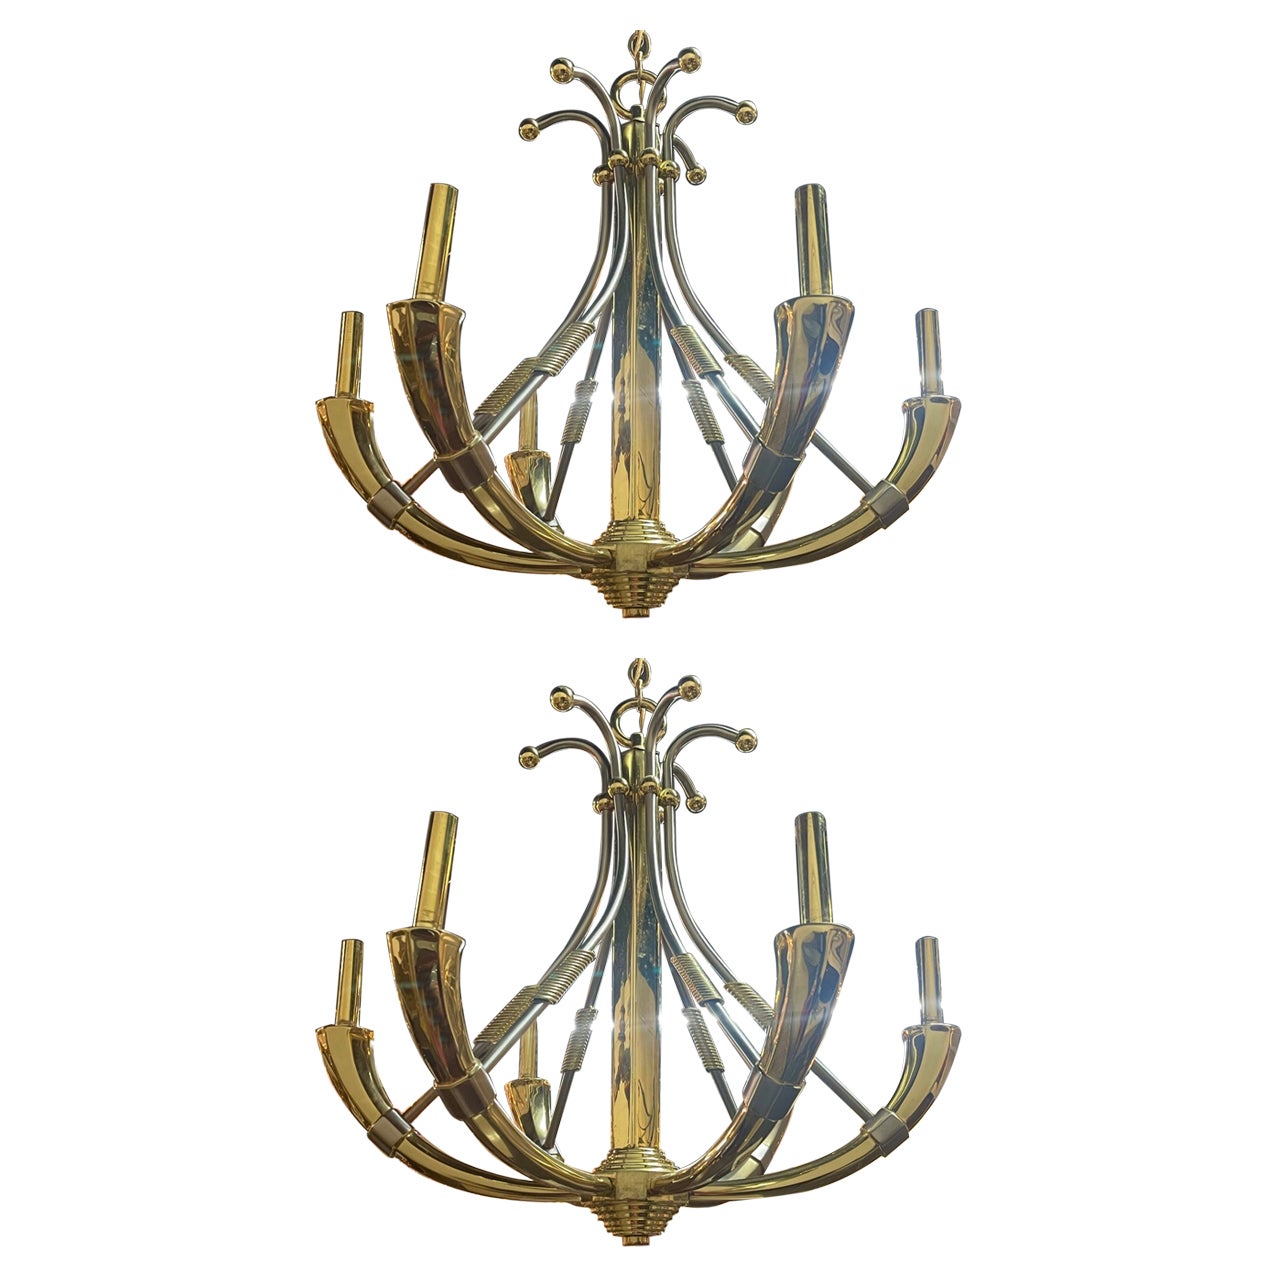 Pair of French Mid-Century Jansen Chandeliers